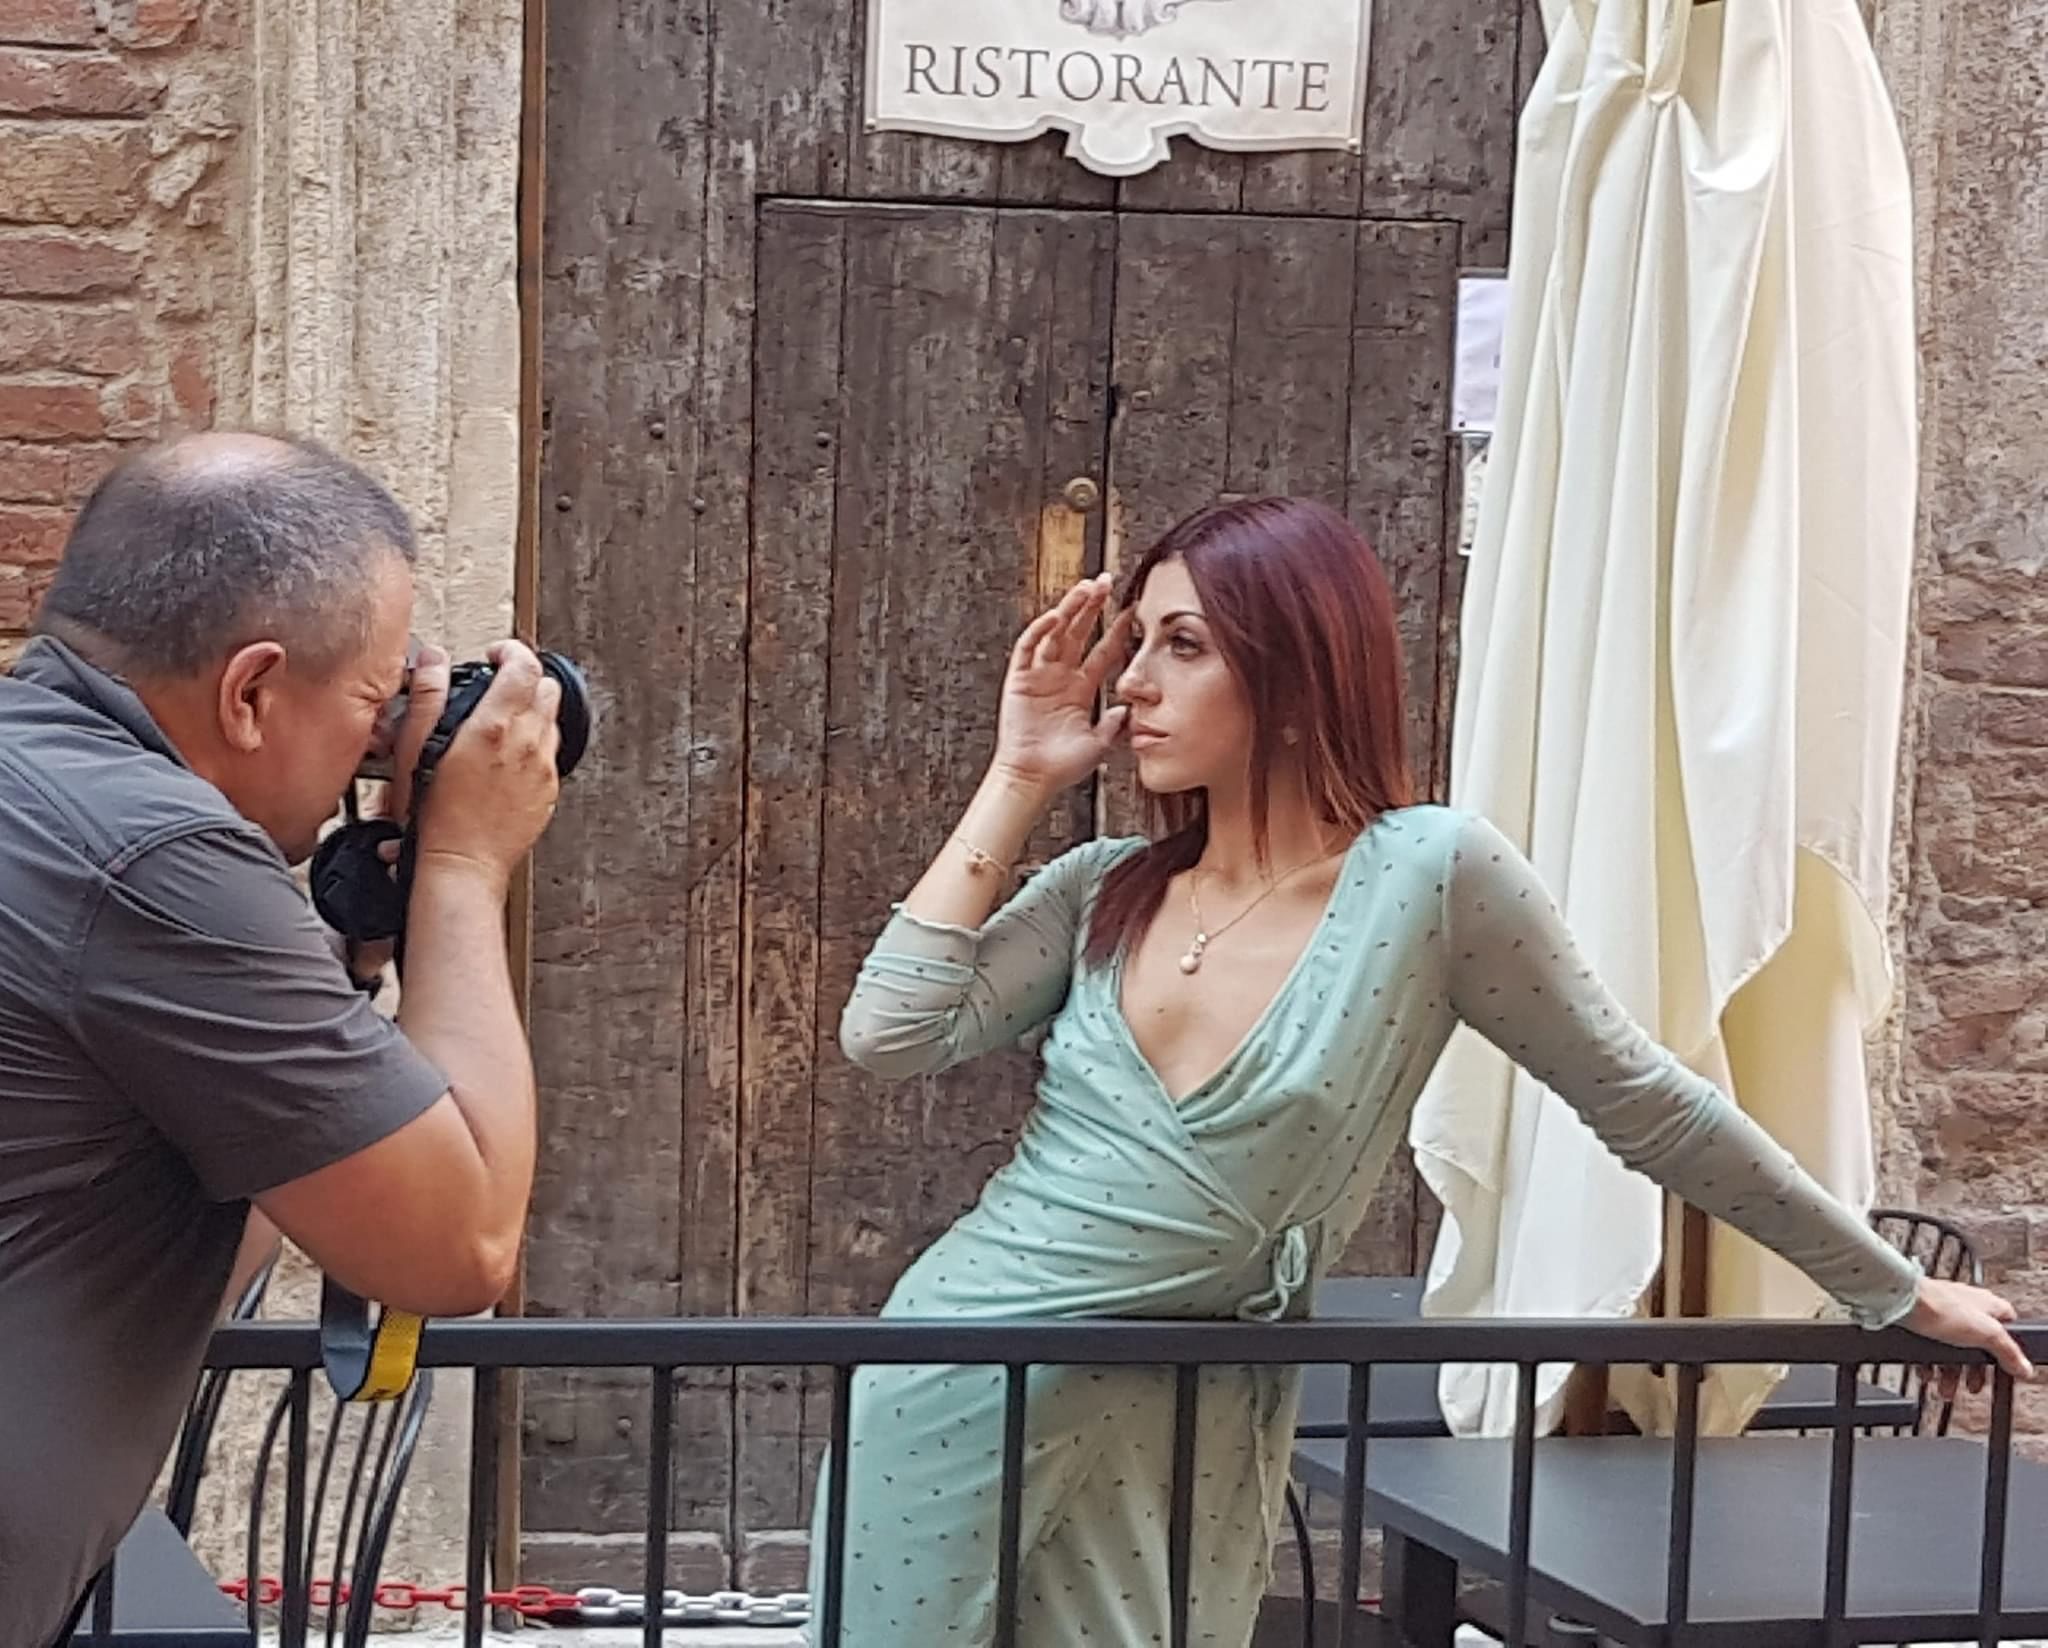 The diva and the photographer...